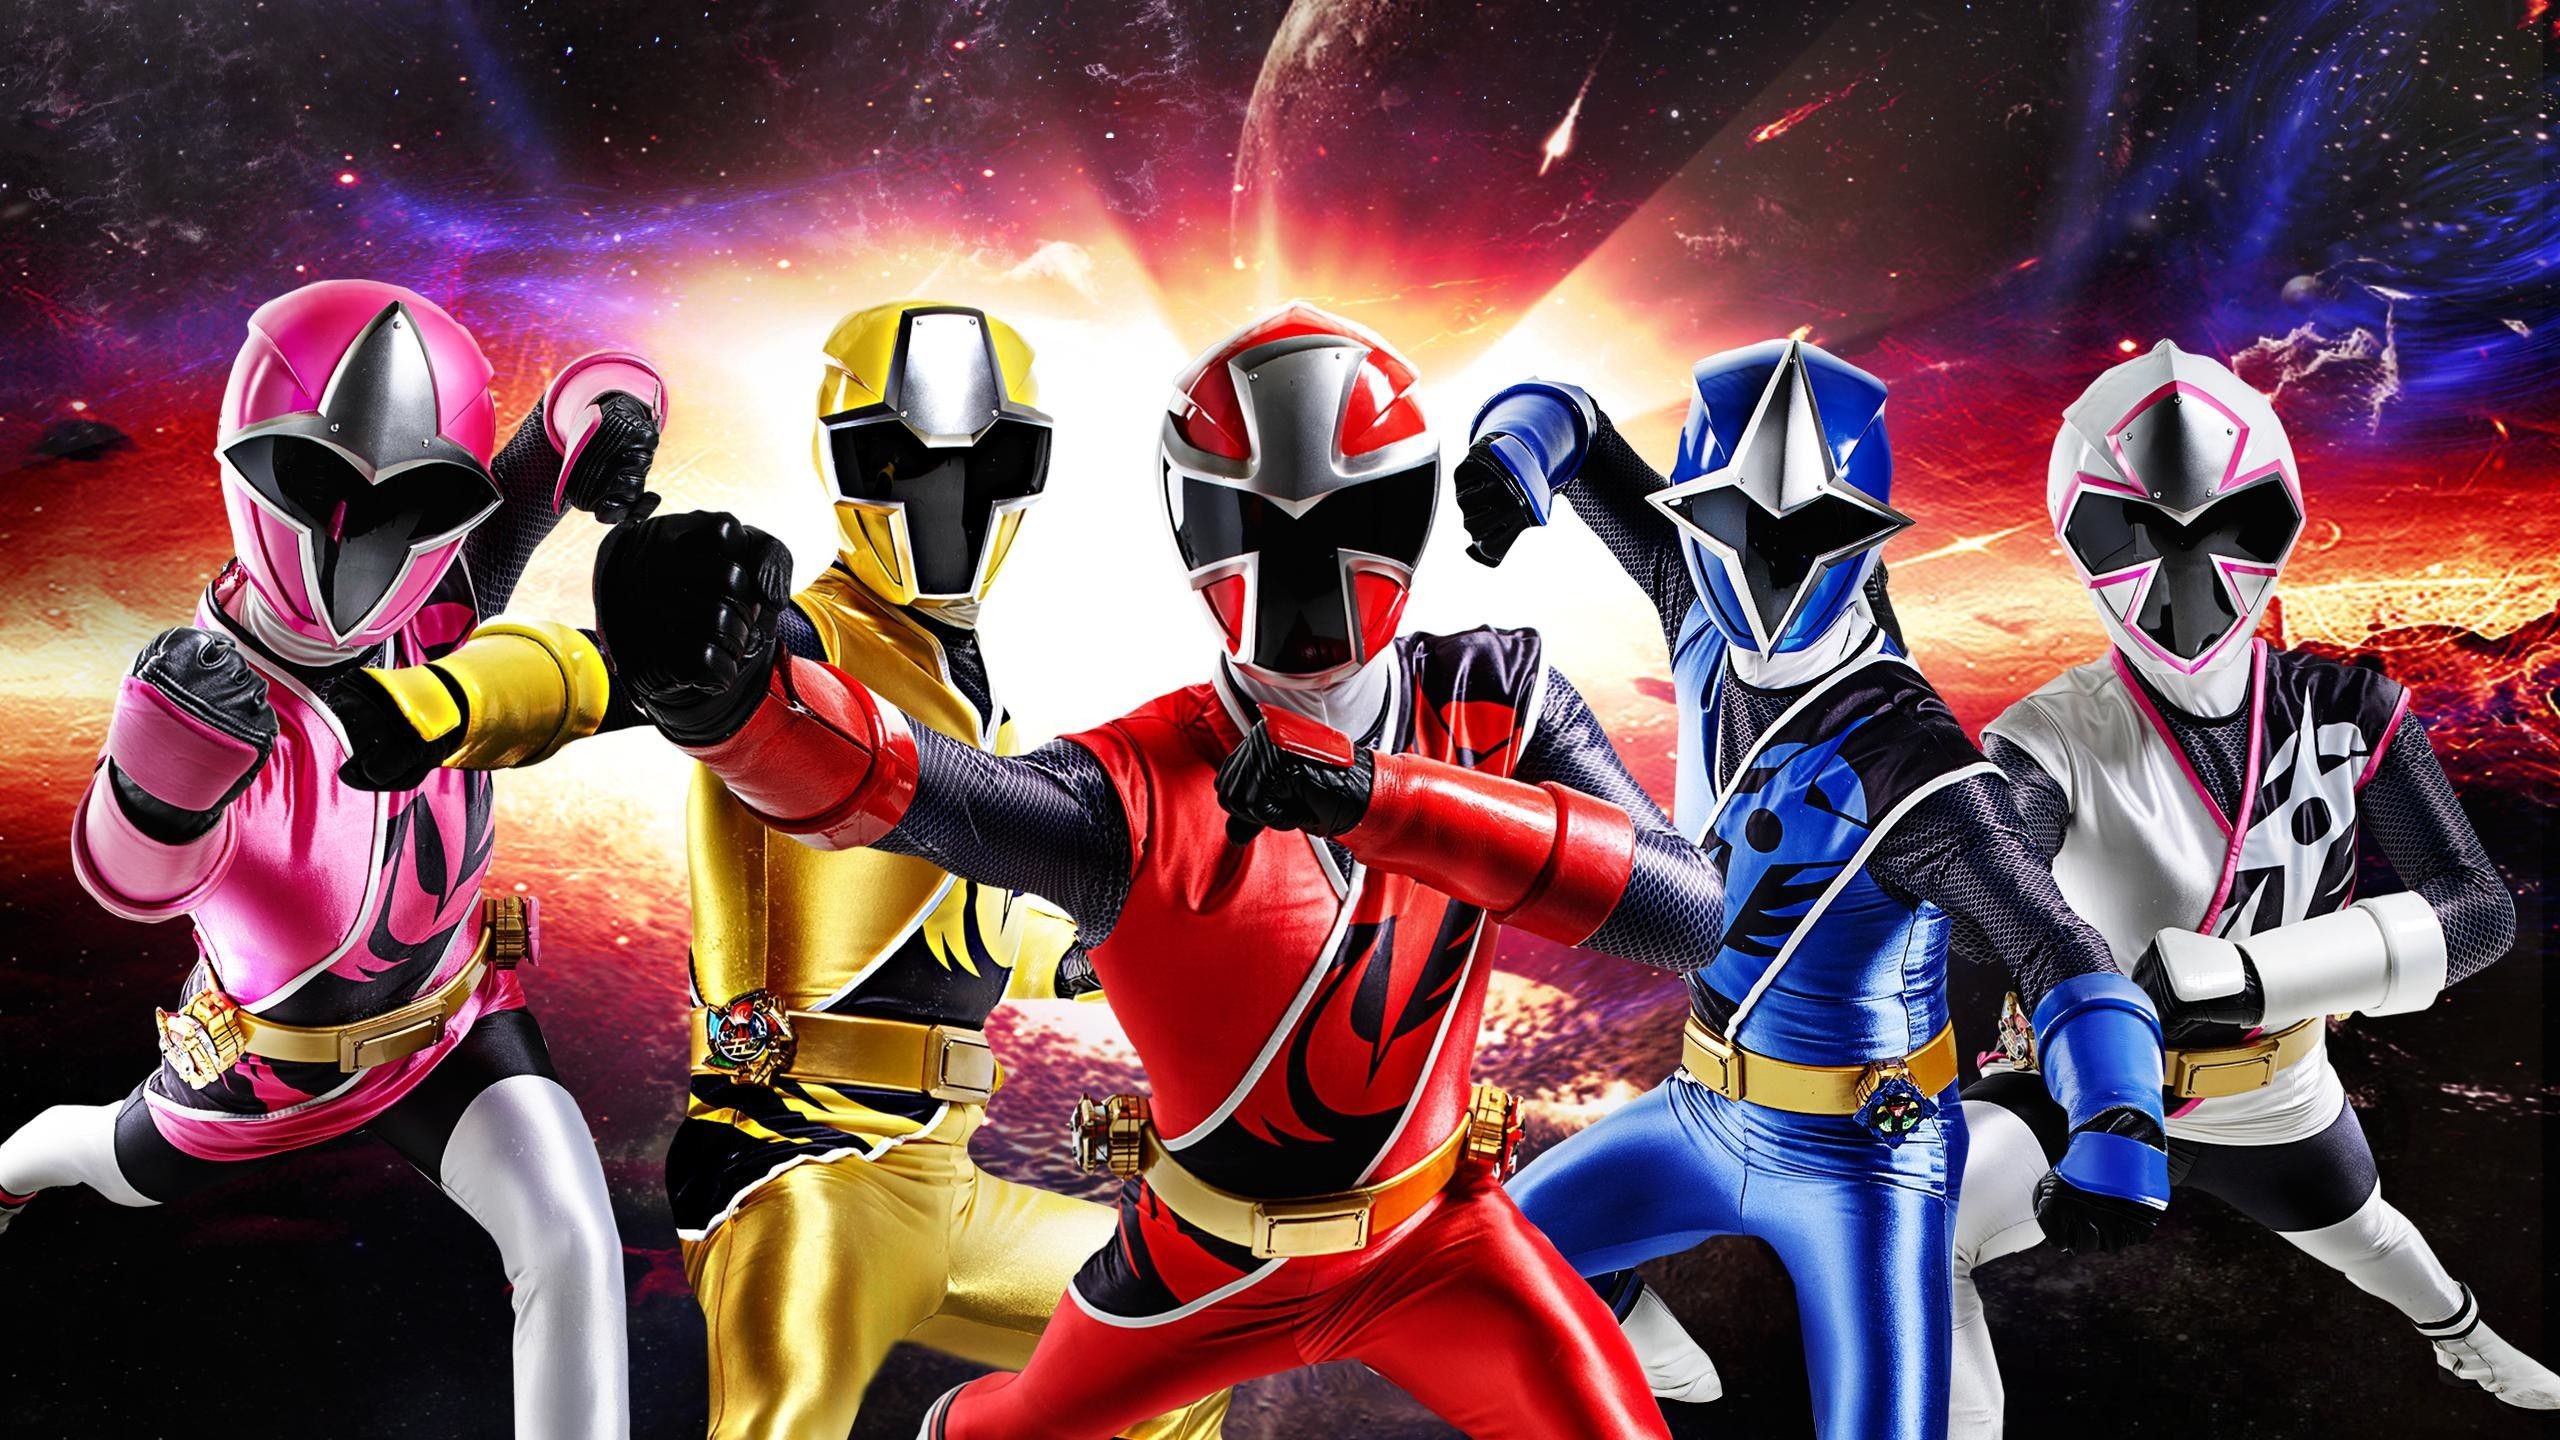 Power Rangers Wallpapers, Images, Backgrounds, Photos and Pictures